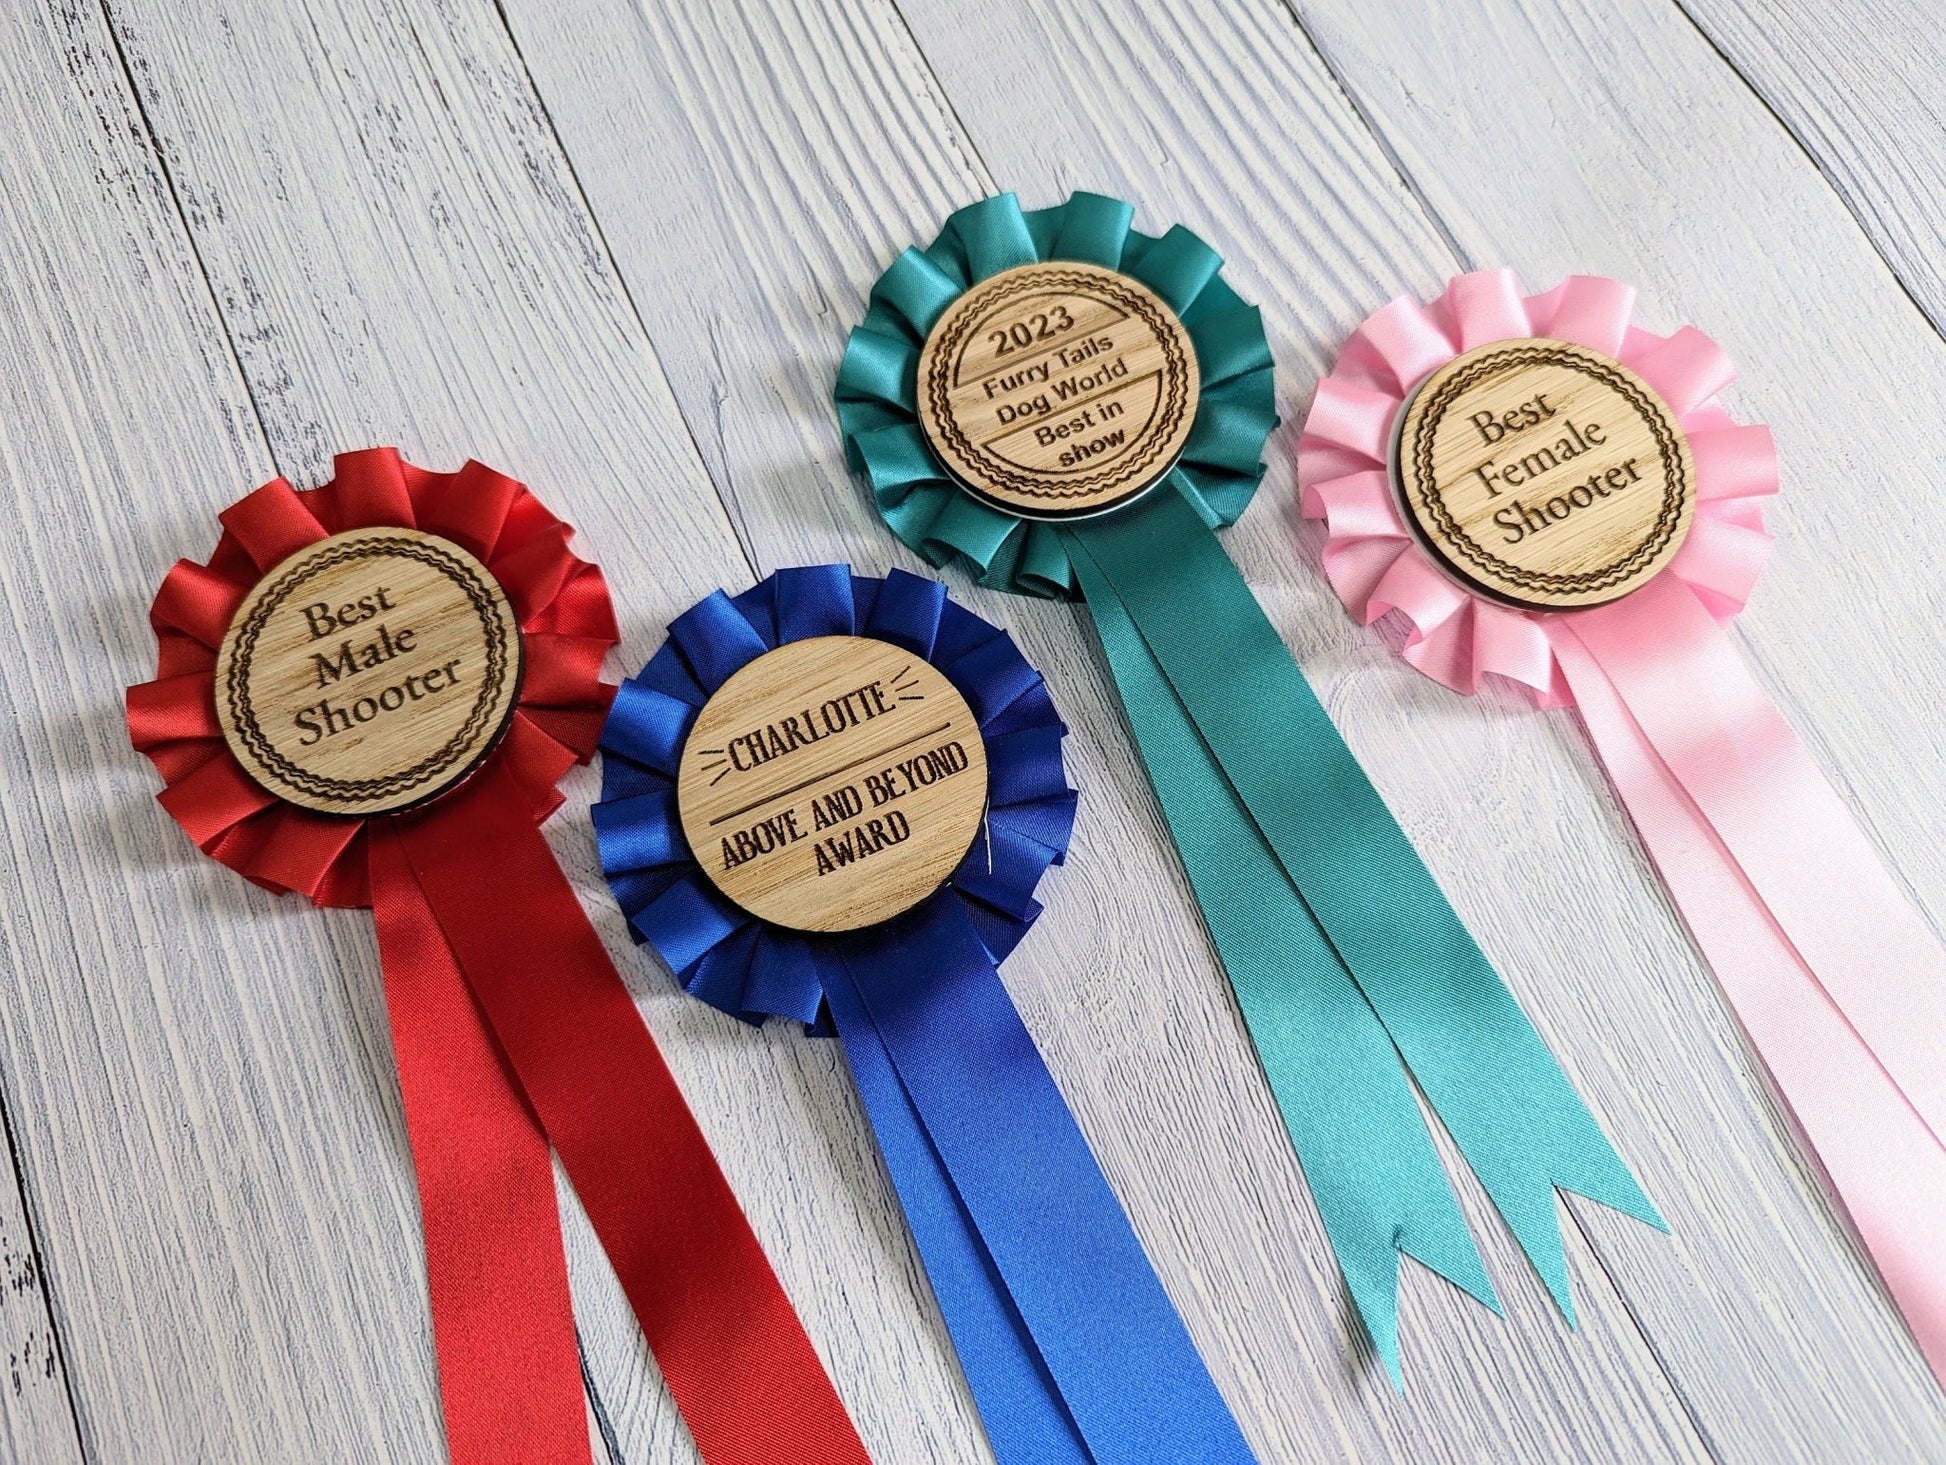 Personalised Wooden Show Jumping Rosette's | Customised Oak Rosettes in 4 Colours | Award Ribbon | Horse Riding - CherryGroveCraft